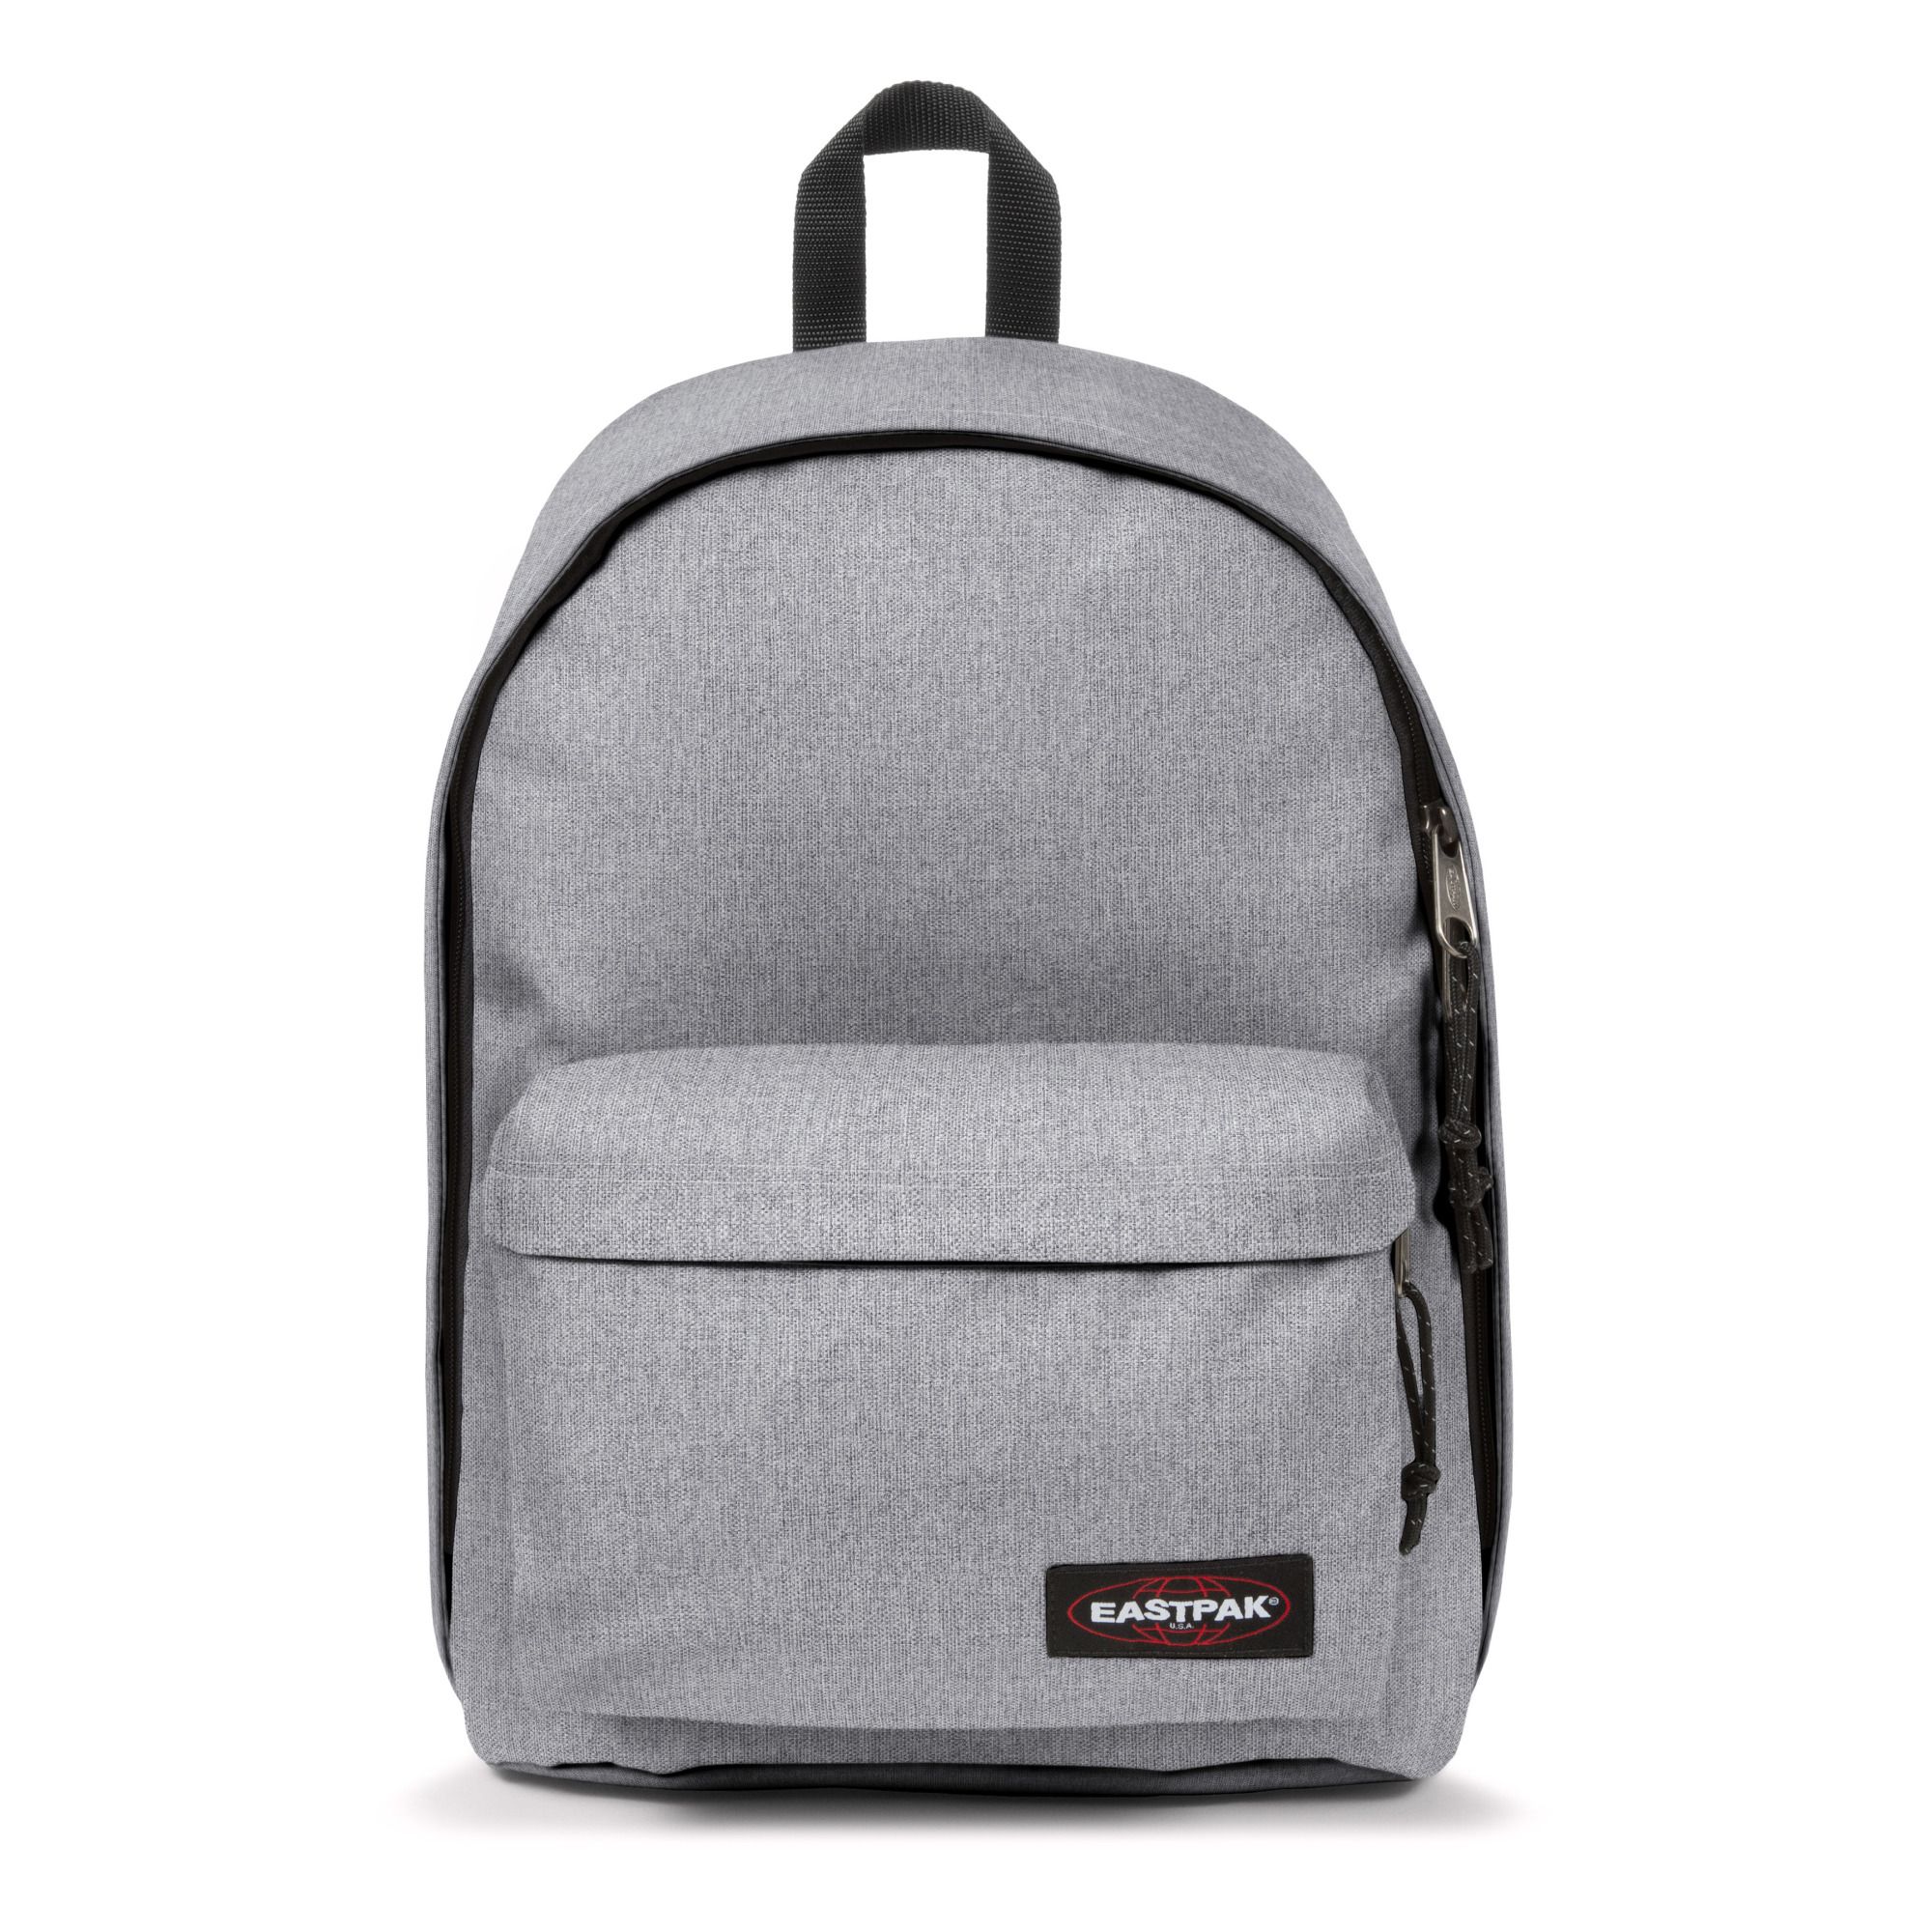 Eastpak - Sac à Dos Out Of Office - Fille - Gris